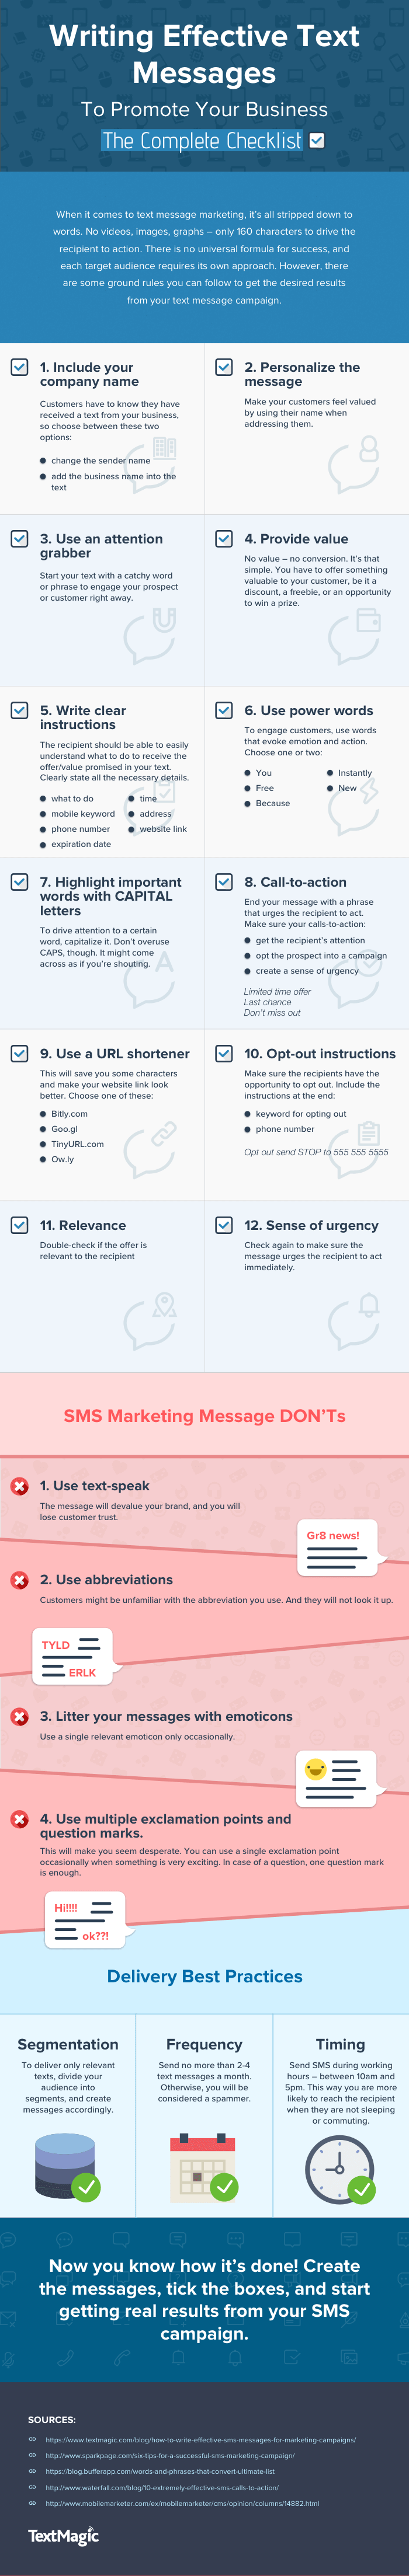 Follow these 12 text message marketing best practices to have the greatest impact on your customers when you text them an offer.